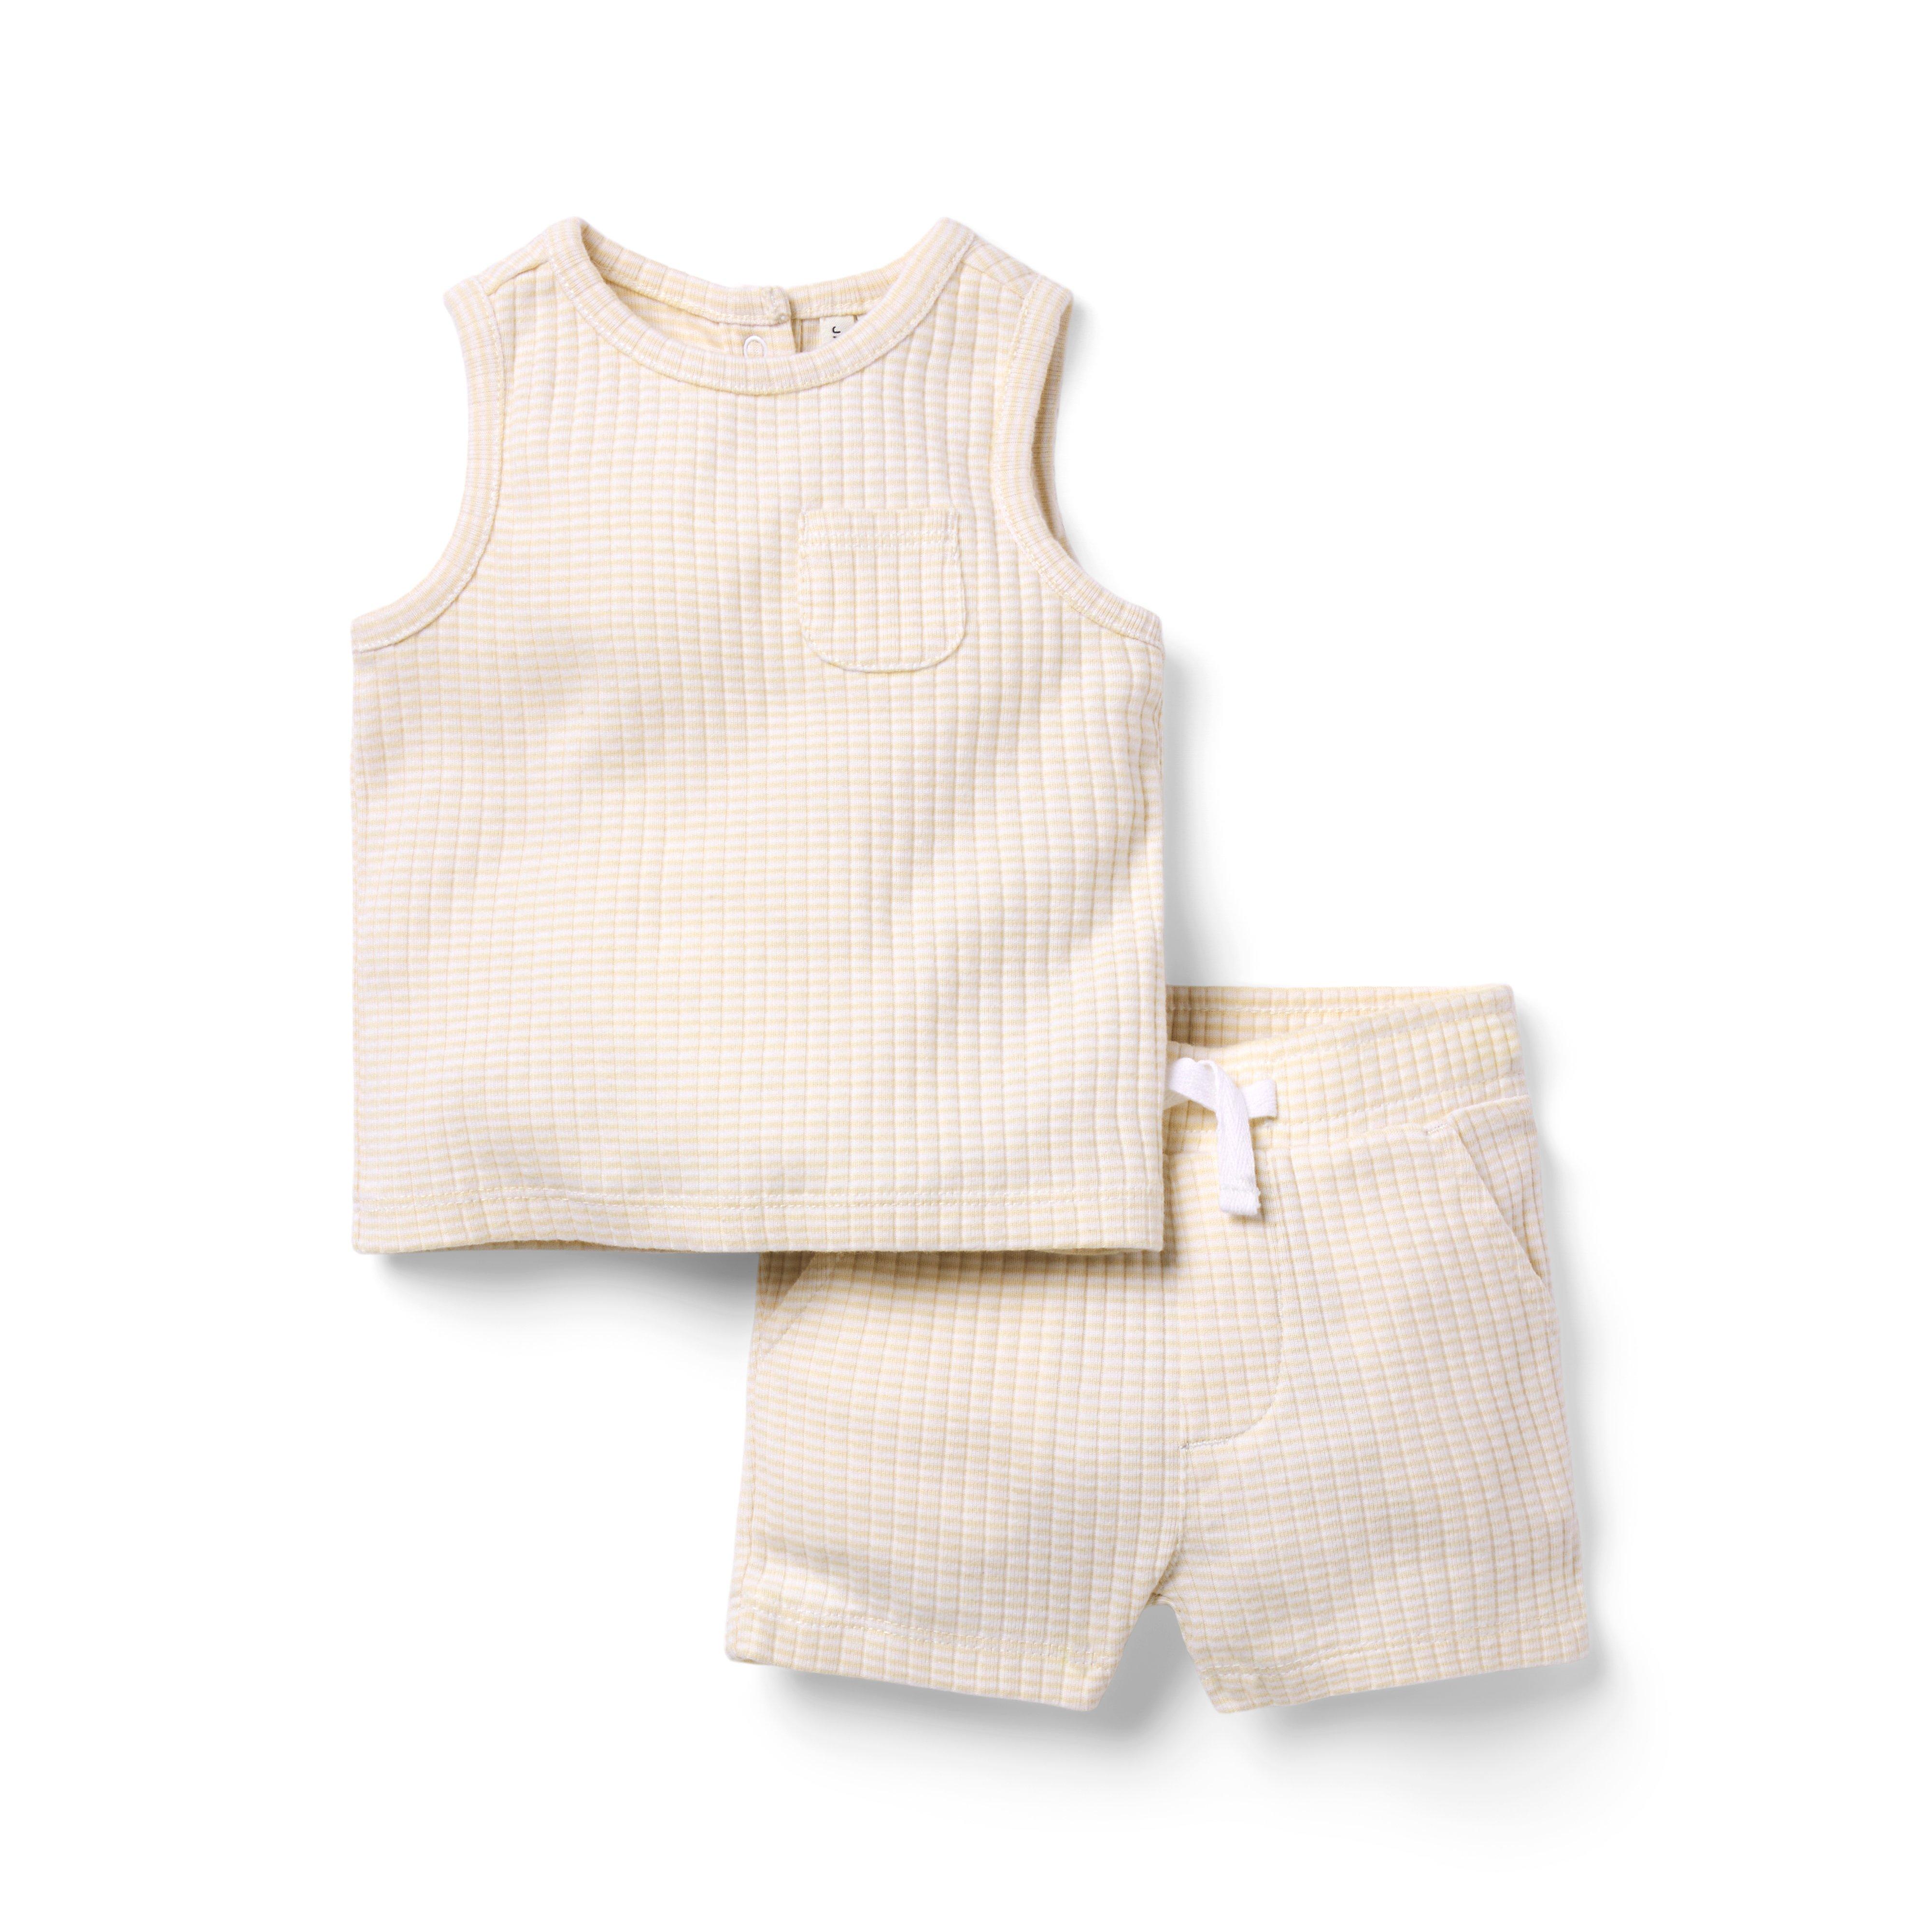 Baby Striped Ribbed Matching Set image number 0